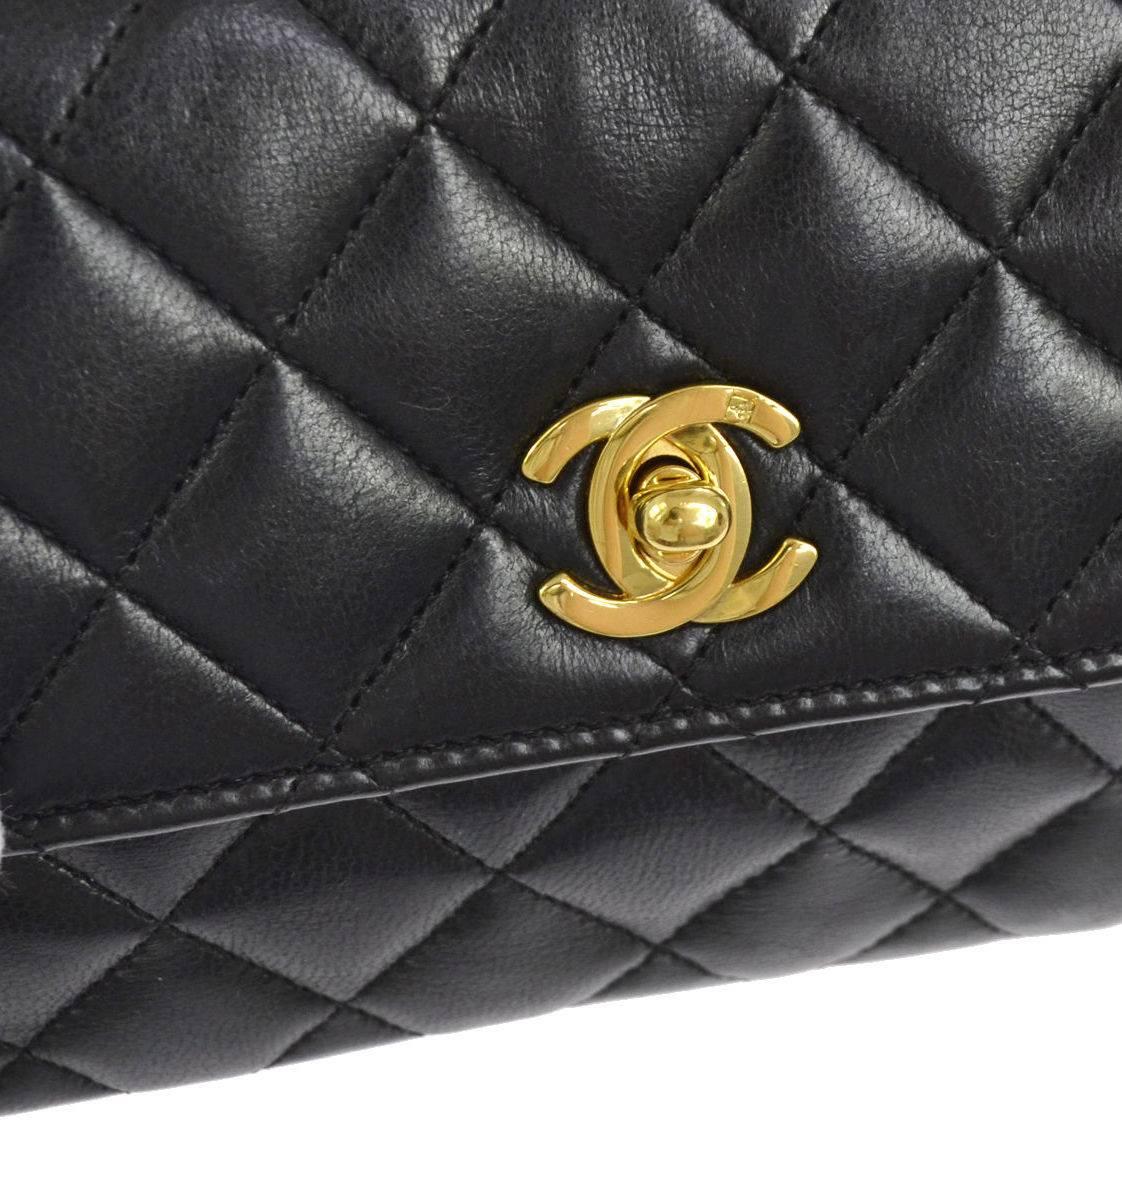 CURATOR'S NOTES

Chanel Classic Black Lambskin Small Evening Flap Shoulder Bag 

Lambskin
Leather lining
Turnlock closure
Made in France
Date code 
Shoulder strap drop 21"
Measures 7.5" W x 4.5" H x 2" D  

Shop Newfound Luxury